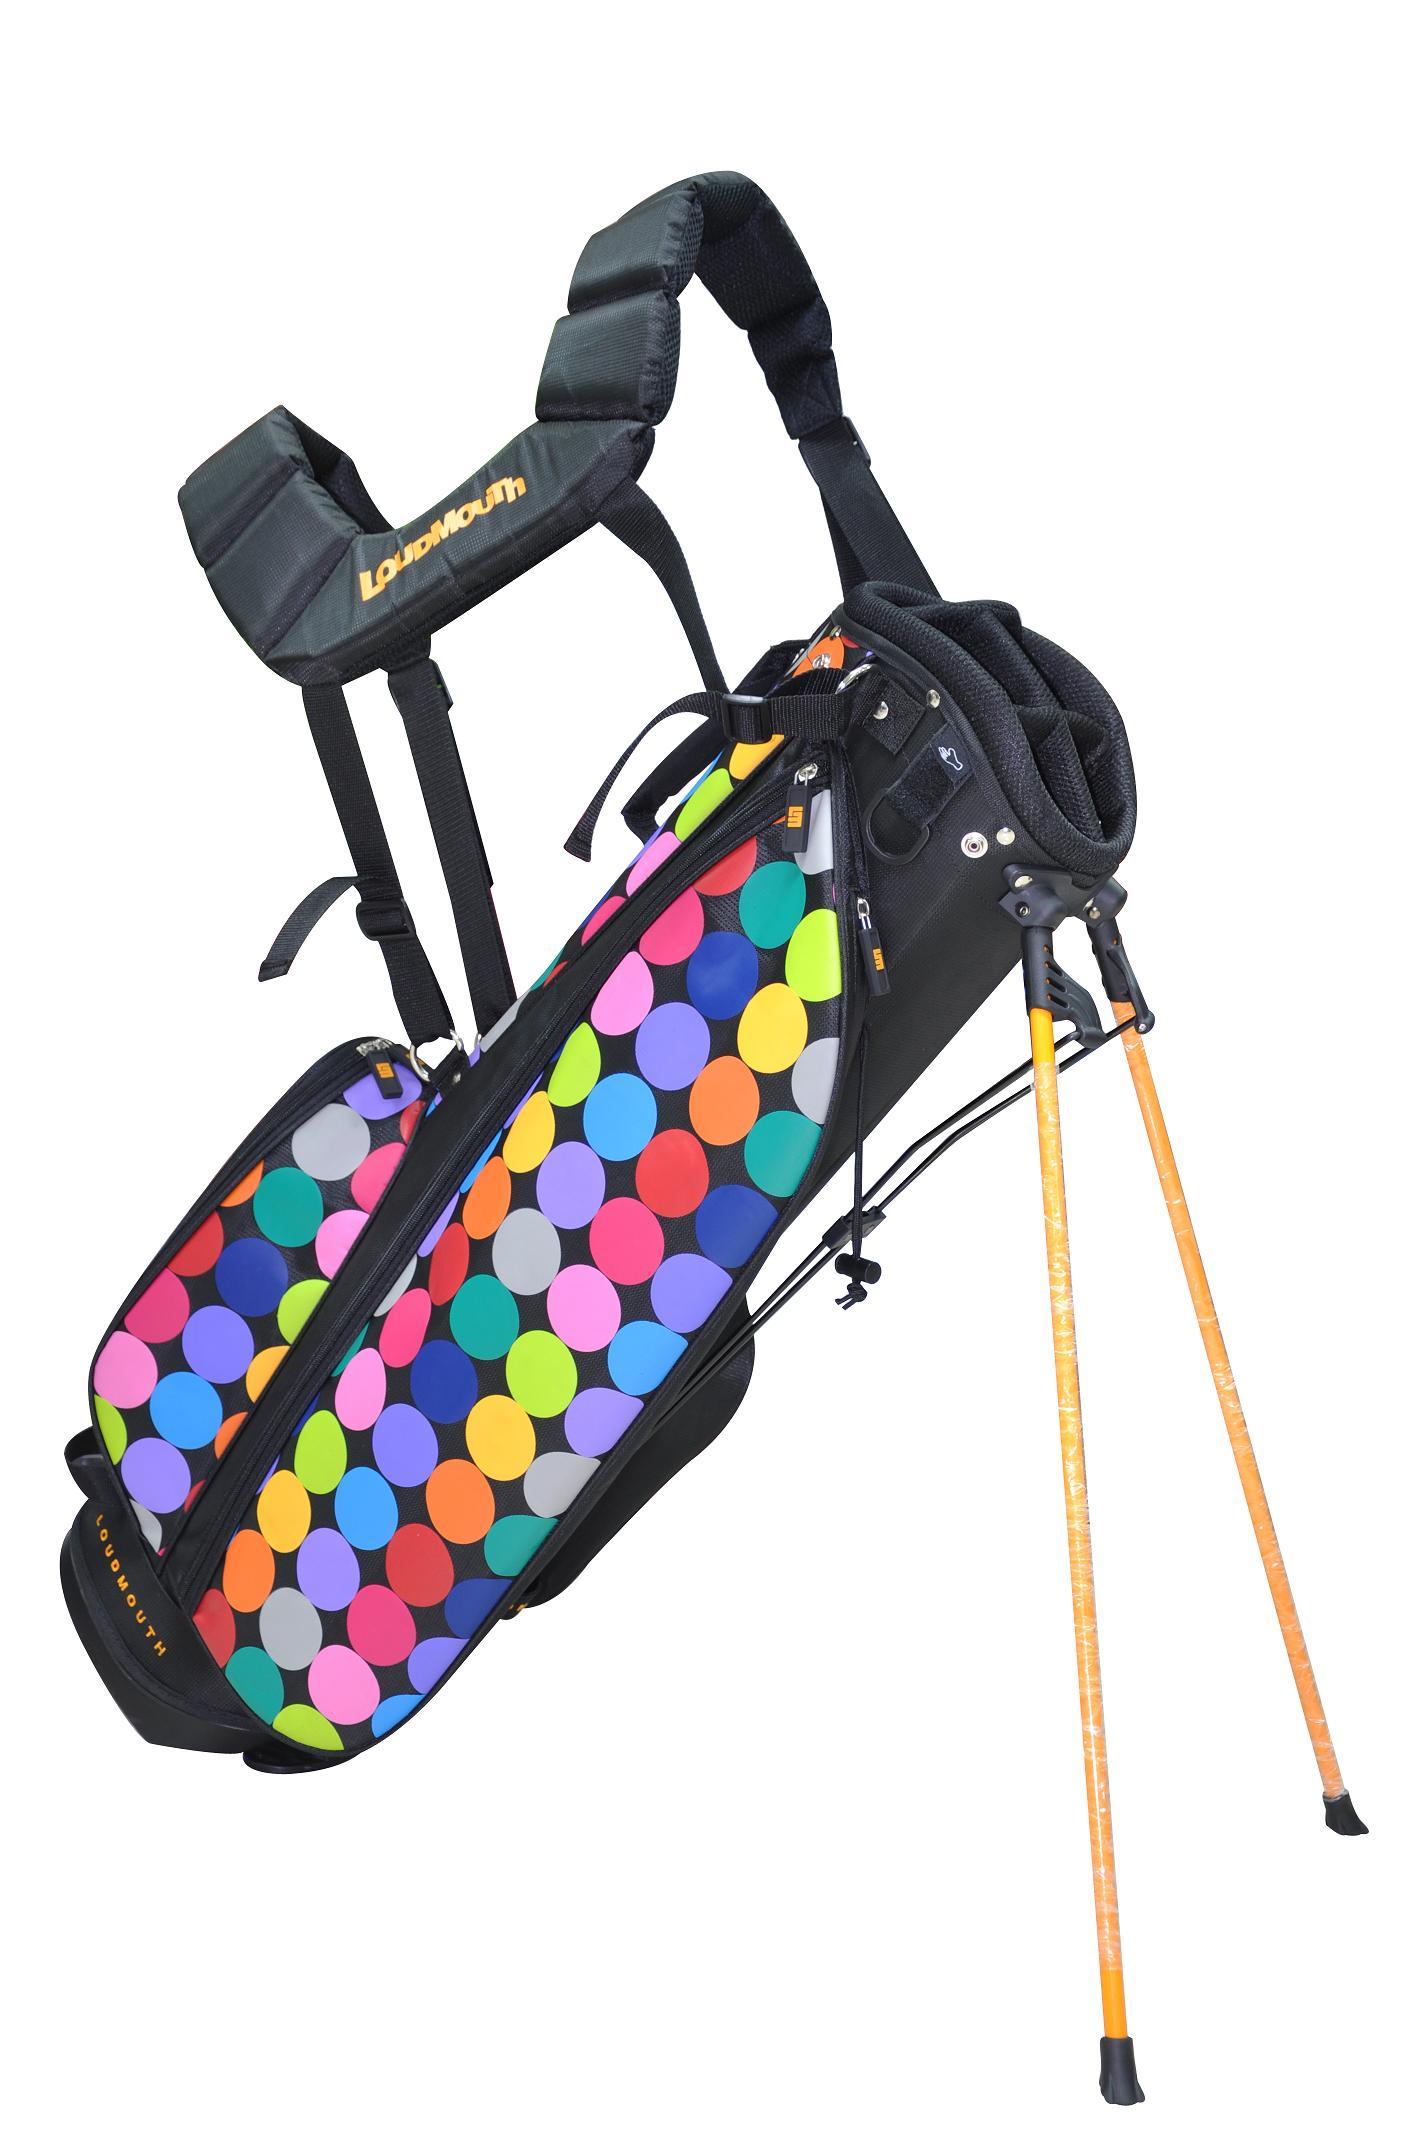 31 Golf Bag Pictures Free Cliparts That You Can Download To You